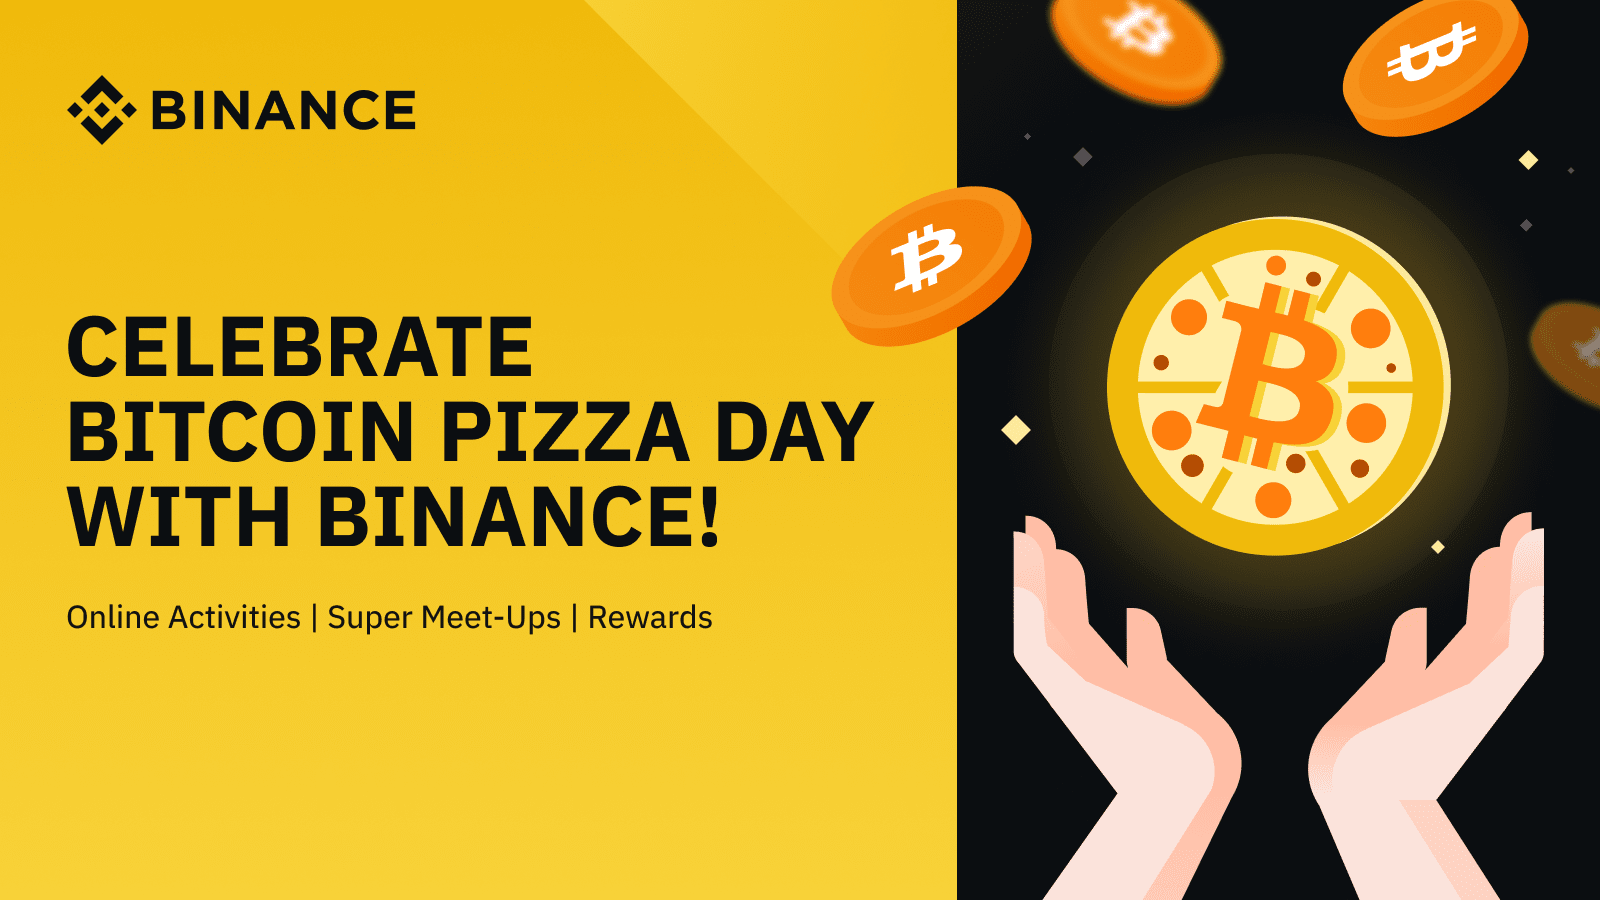 Crypto Industry Celebrates 11th Anniversary of First Official BTC Transaction, Bitcoin Pizza Day